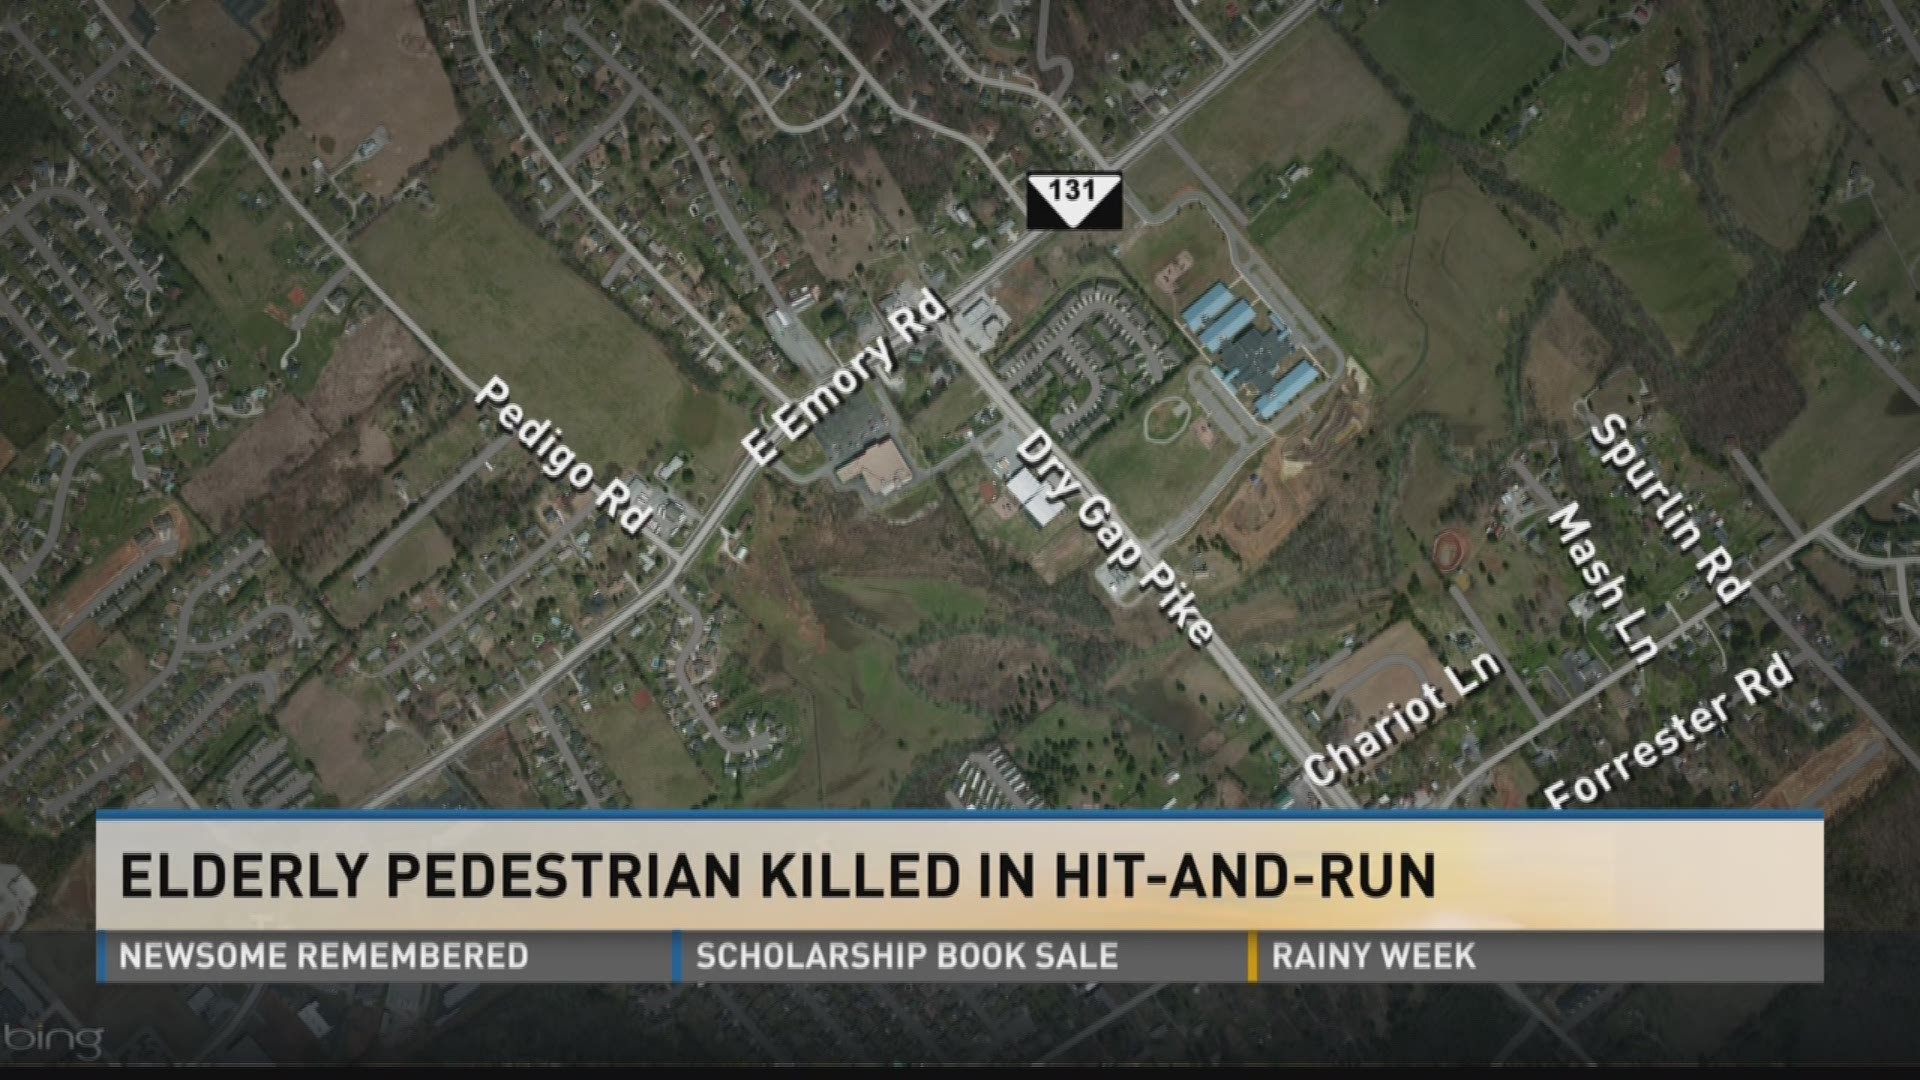 The 78-year-old man was killed in a hit-and-run in North Knox County on Sunday night.